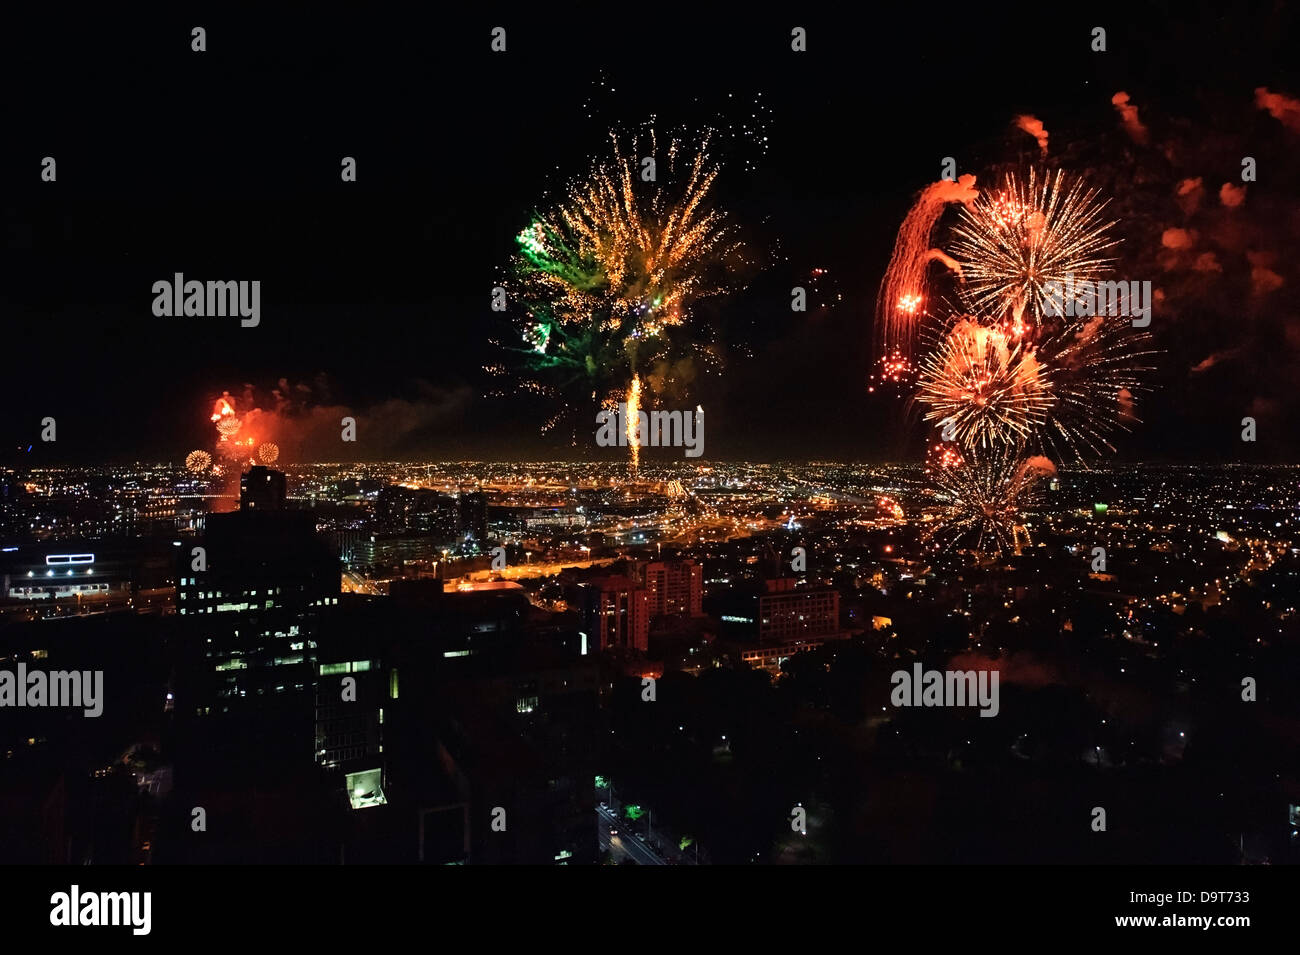 Spectacular fireworks photographed from atop a skyscraper light up the night sky over Melbourne Australia. Stock Photo